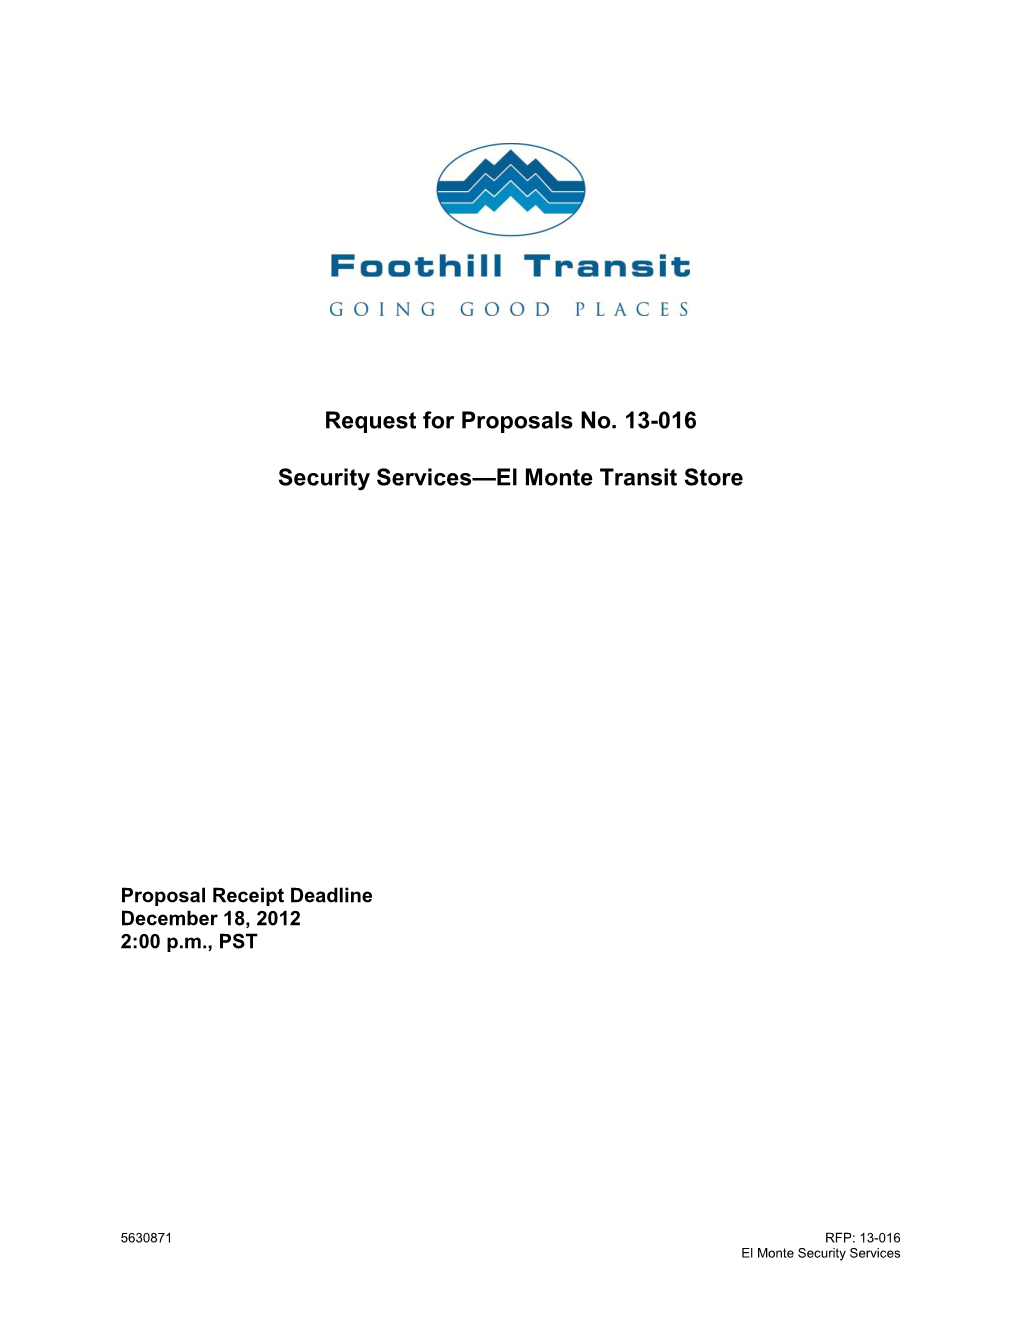 Foothill Transit Is Issuing a Request for Proposals No